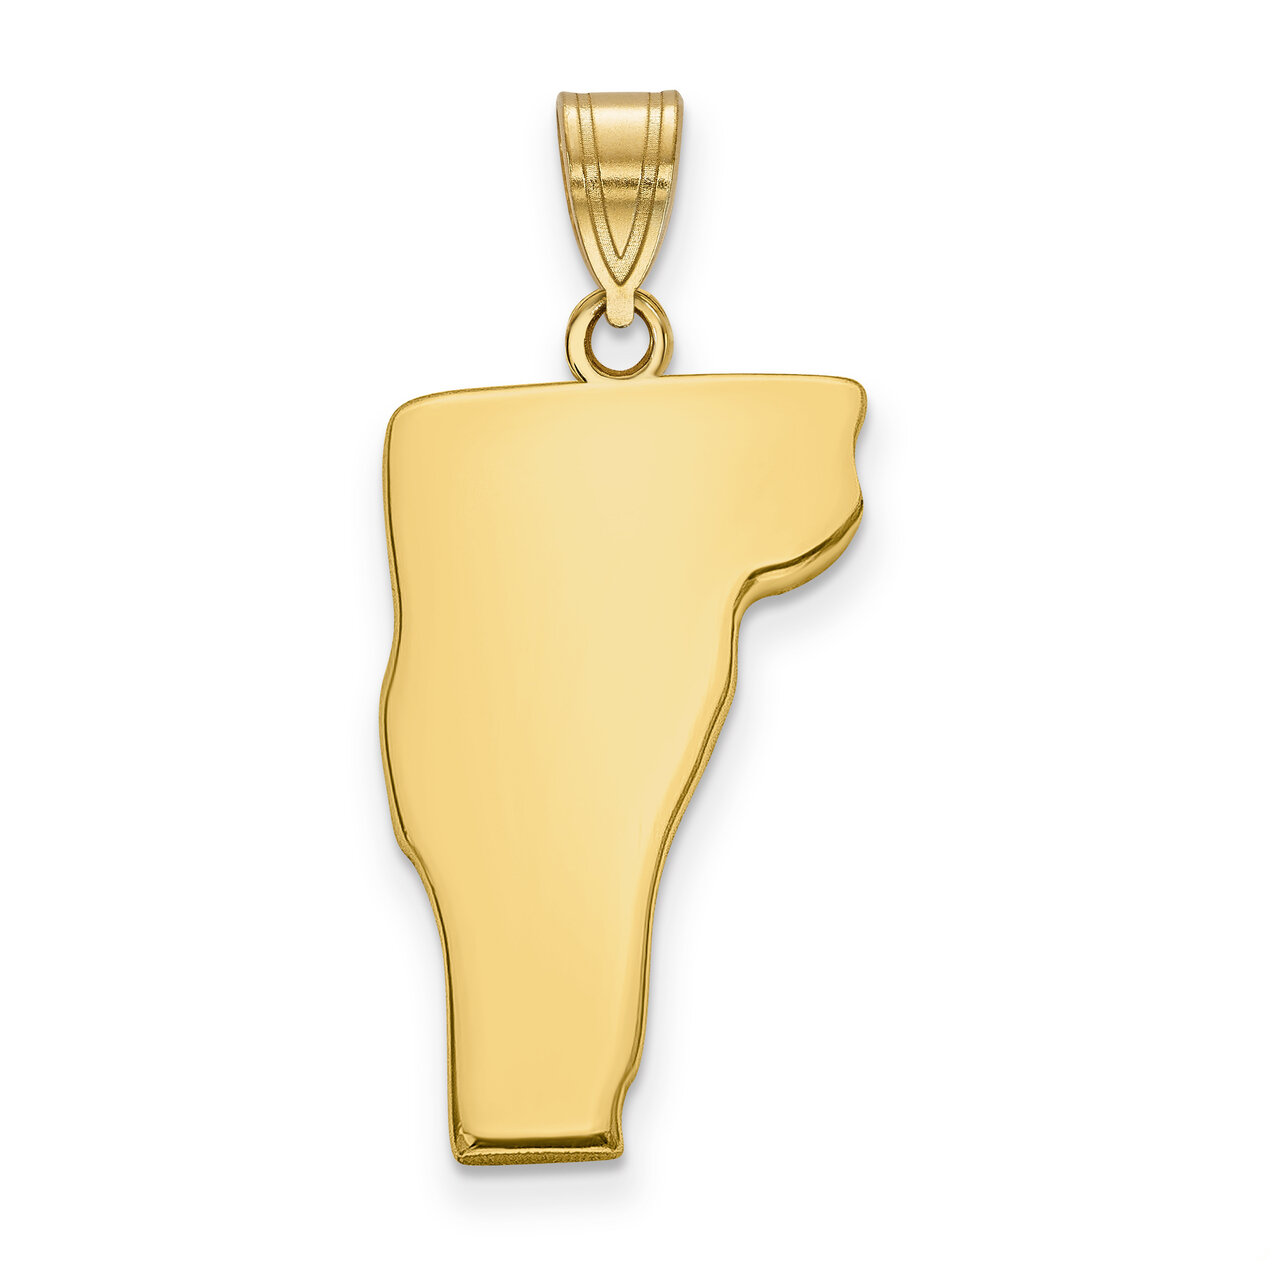 Vermont State Pendant Charm Gold-plated on Silver Engravable XNA707GP-VT